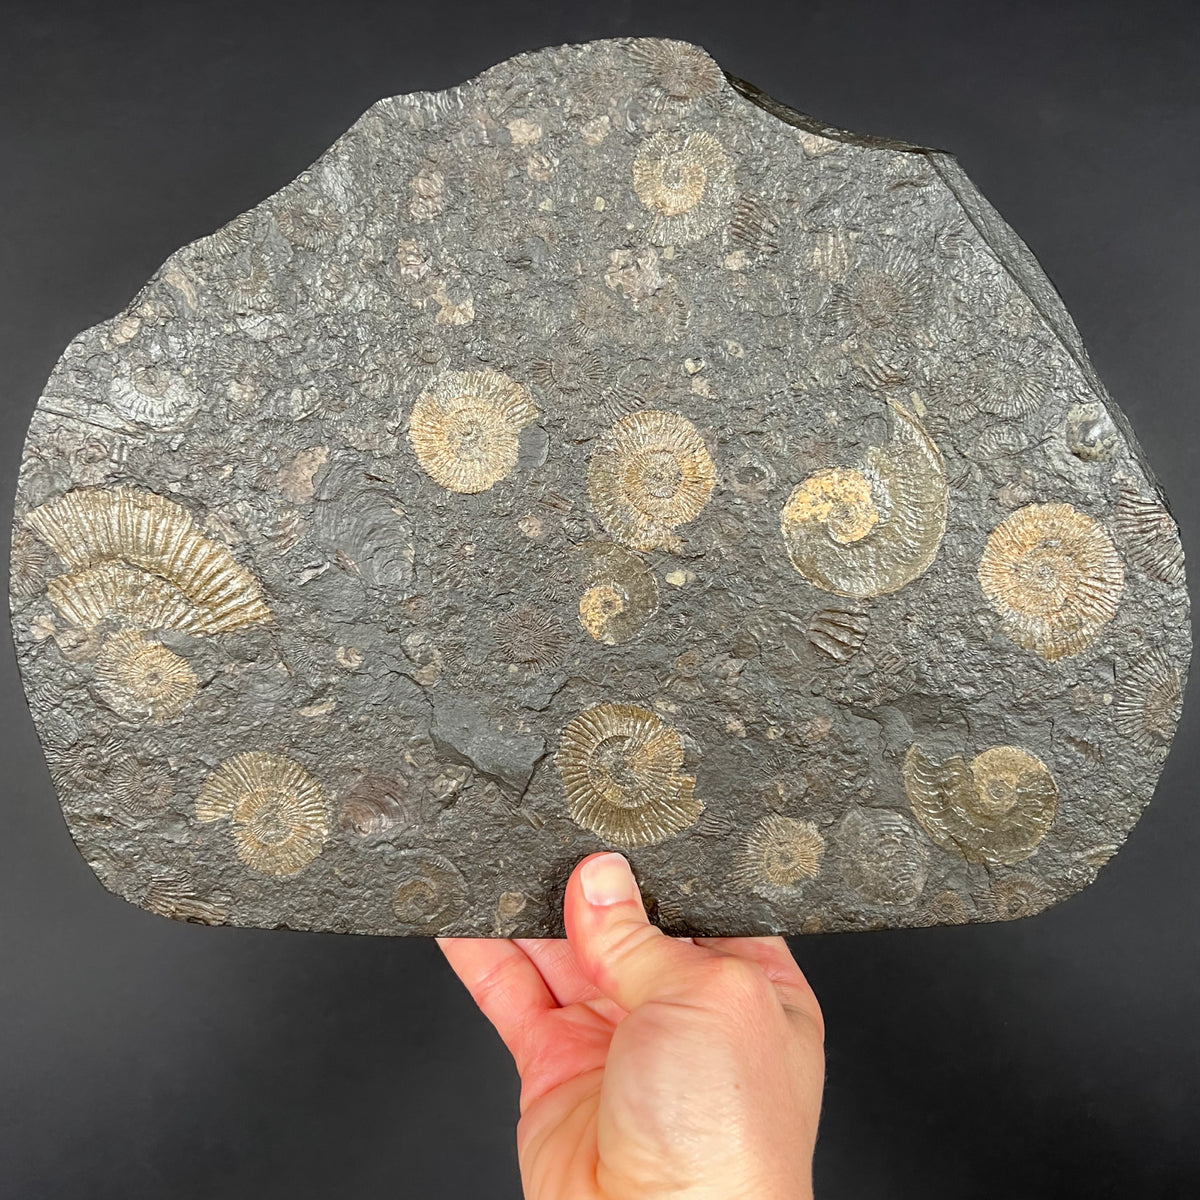 Pyritized Dactylioceras and Harpoceras Ammonite Plate